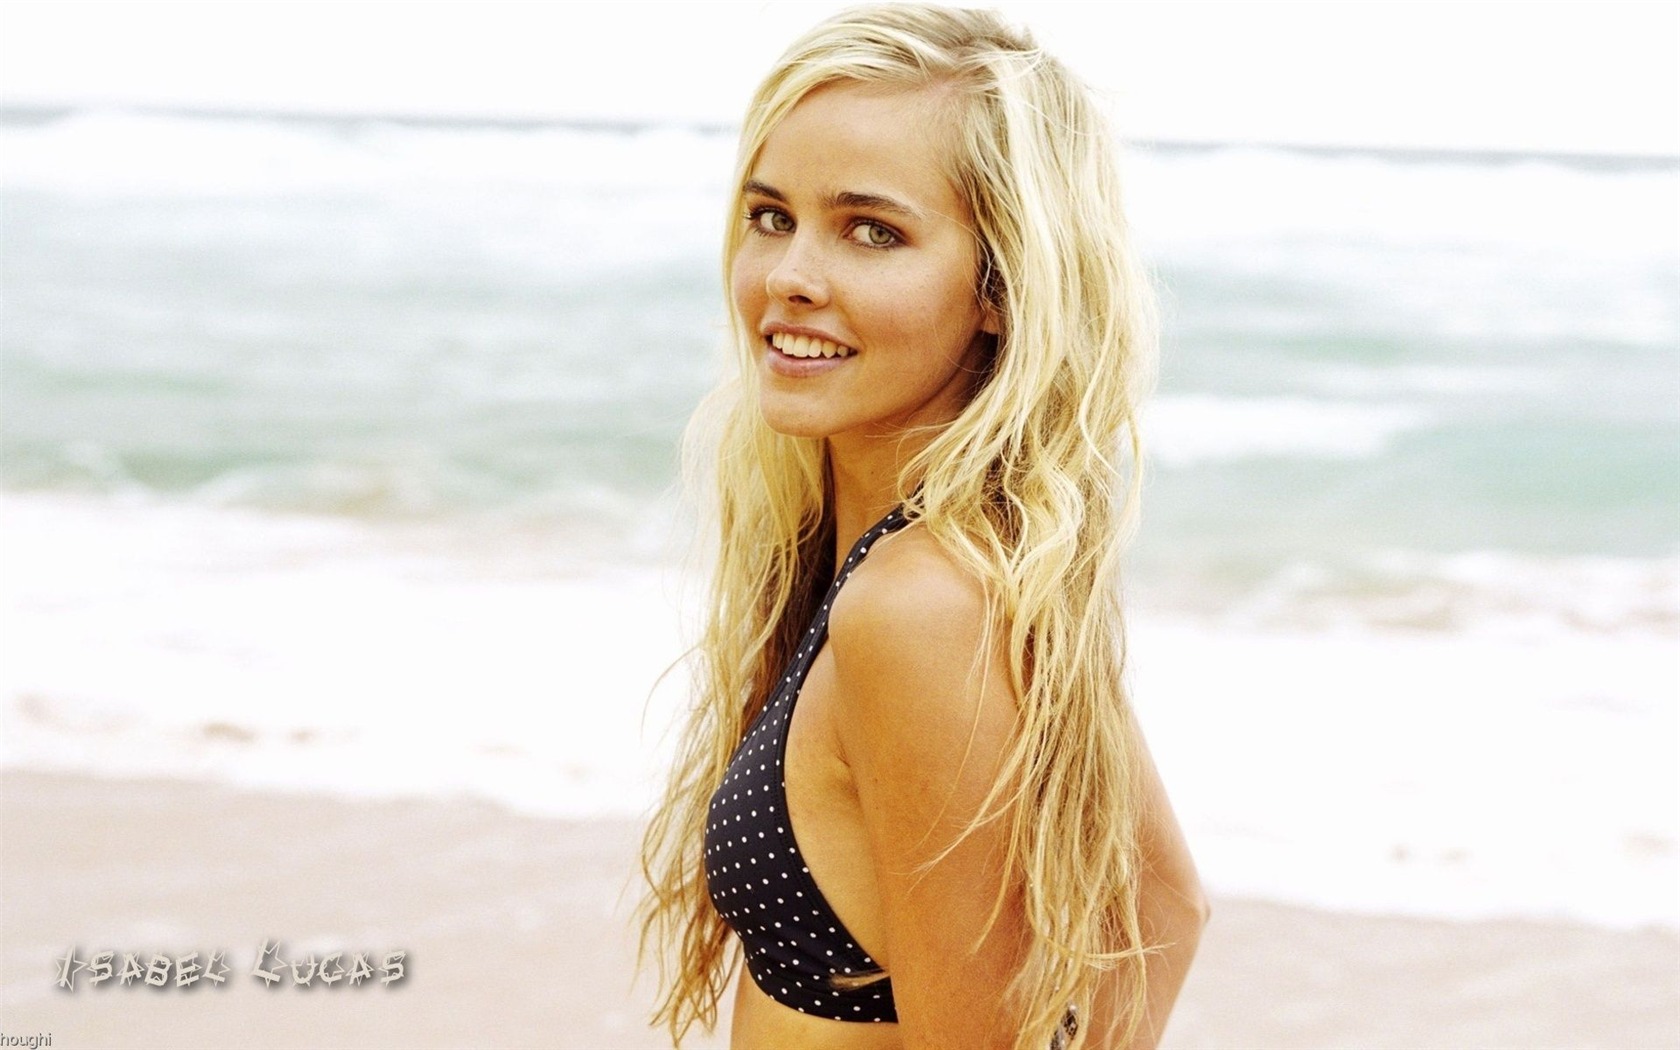 Isabel Lucas #005 - 1680x1050 Wallpapers Pictures Photos Images